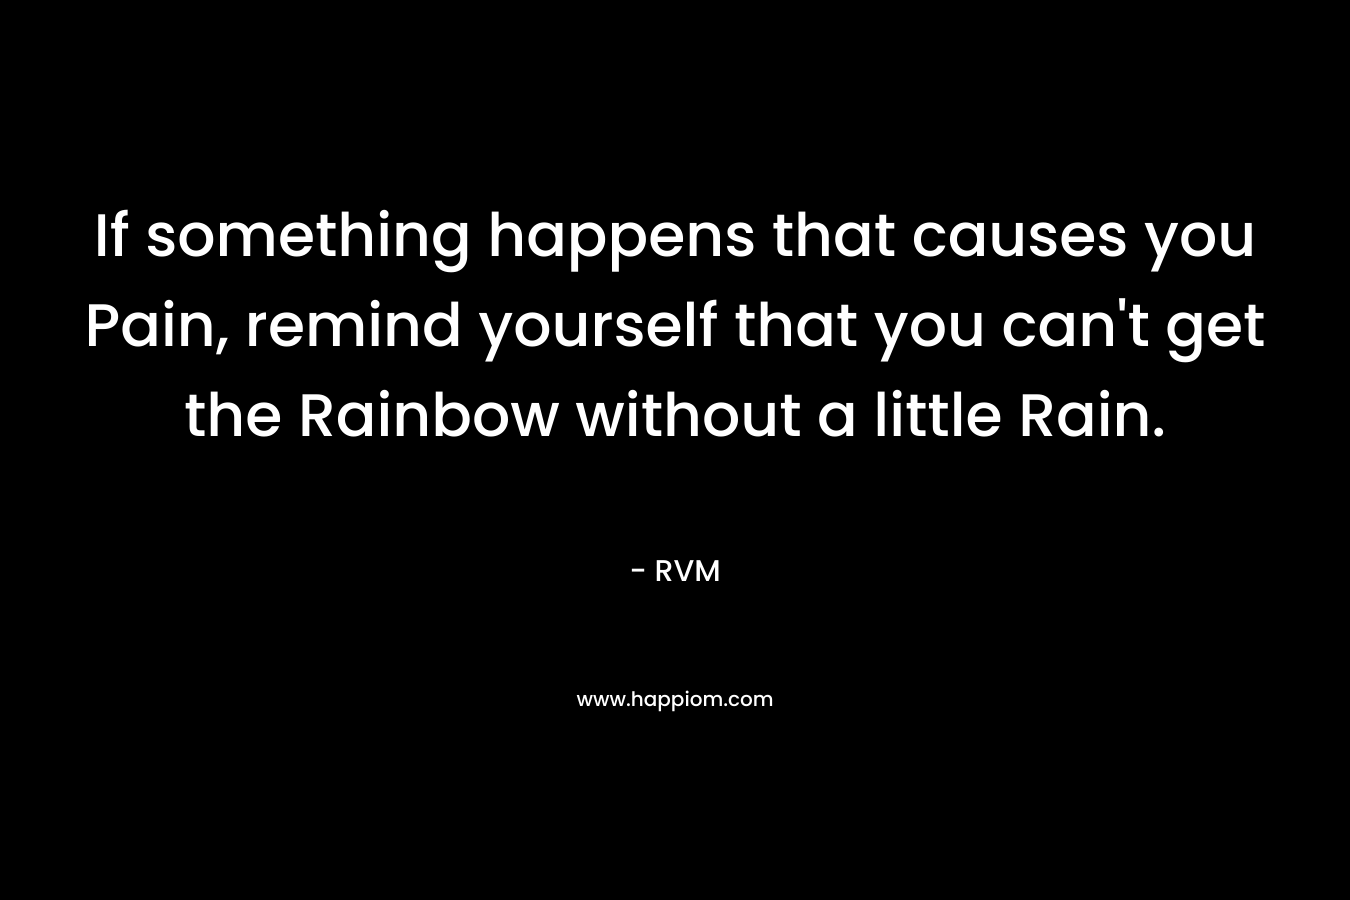 If something happens that causes you Pain, remind yourself that you can't get the Rainbow without a little Rain.